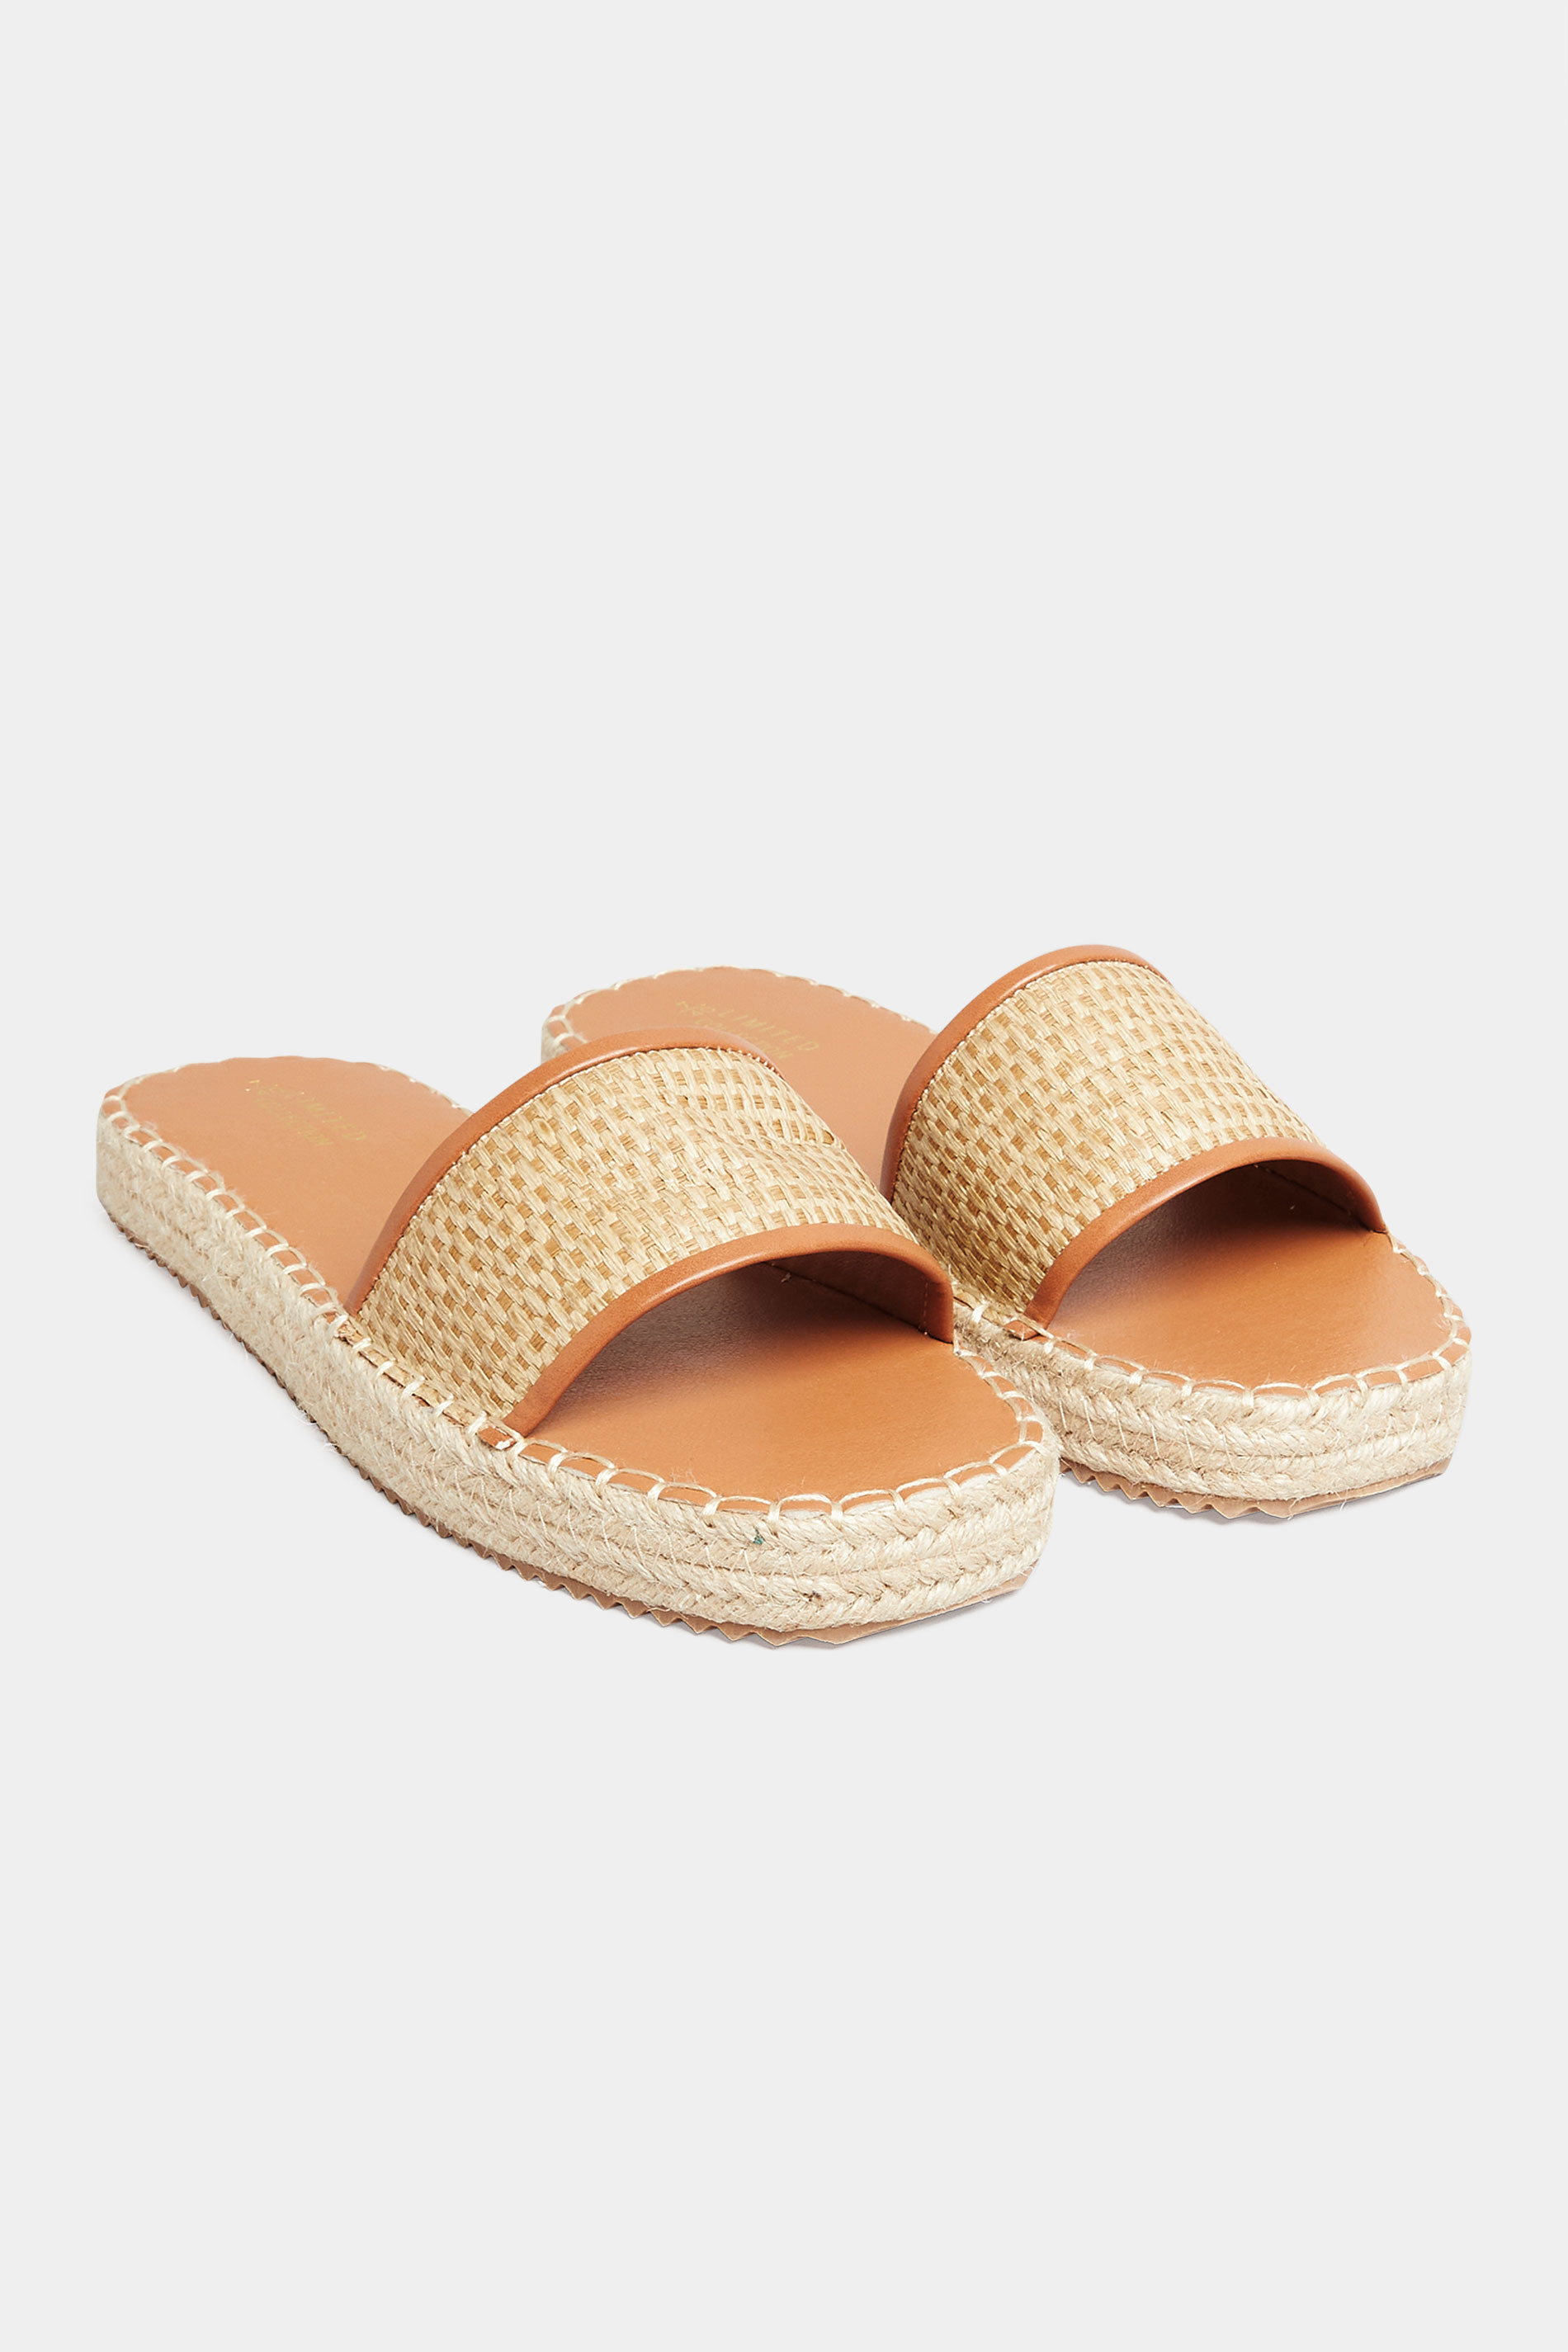 Chaussures Pieds Larges Mules & Chaussures Plates Pieds Larges | Espadrilles-Mules Marrons Pieds Large E - LN50783